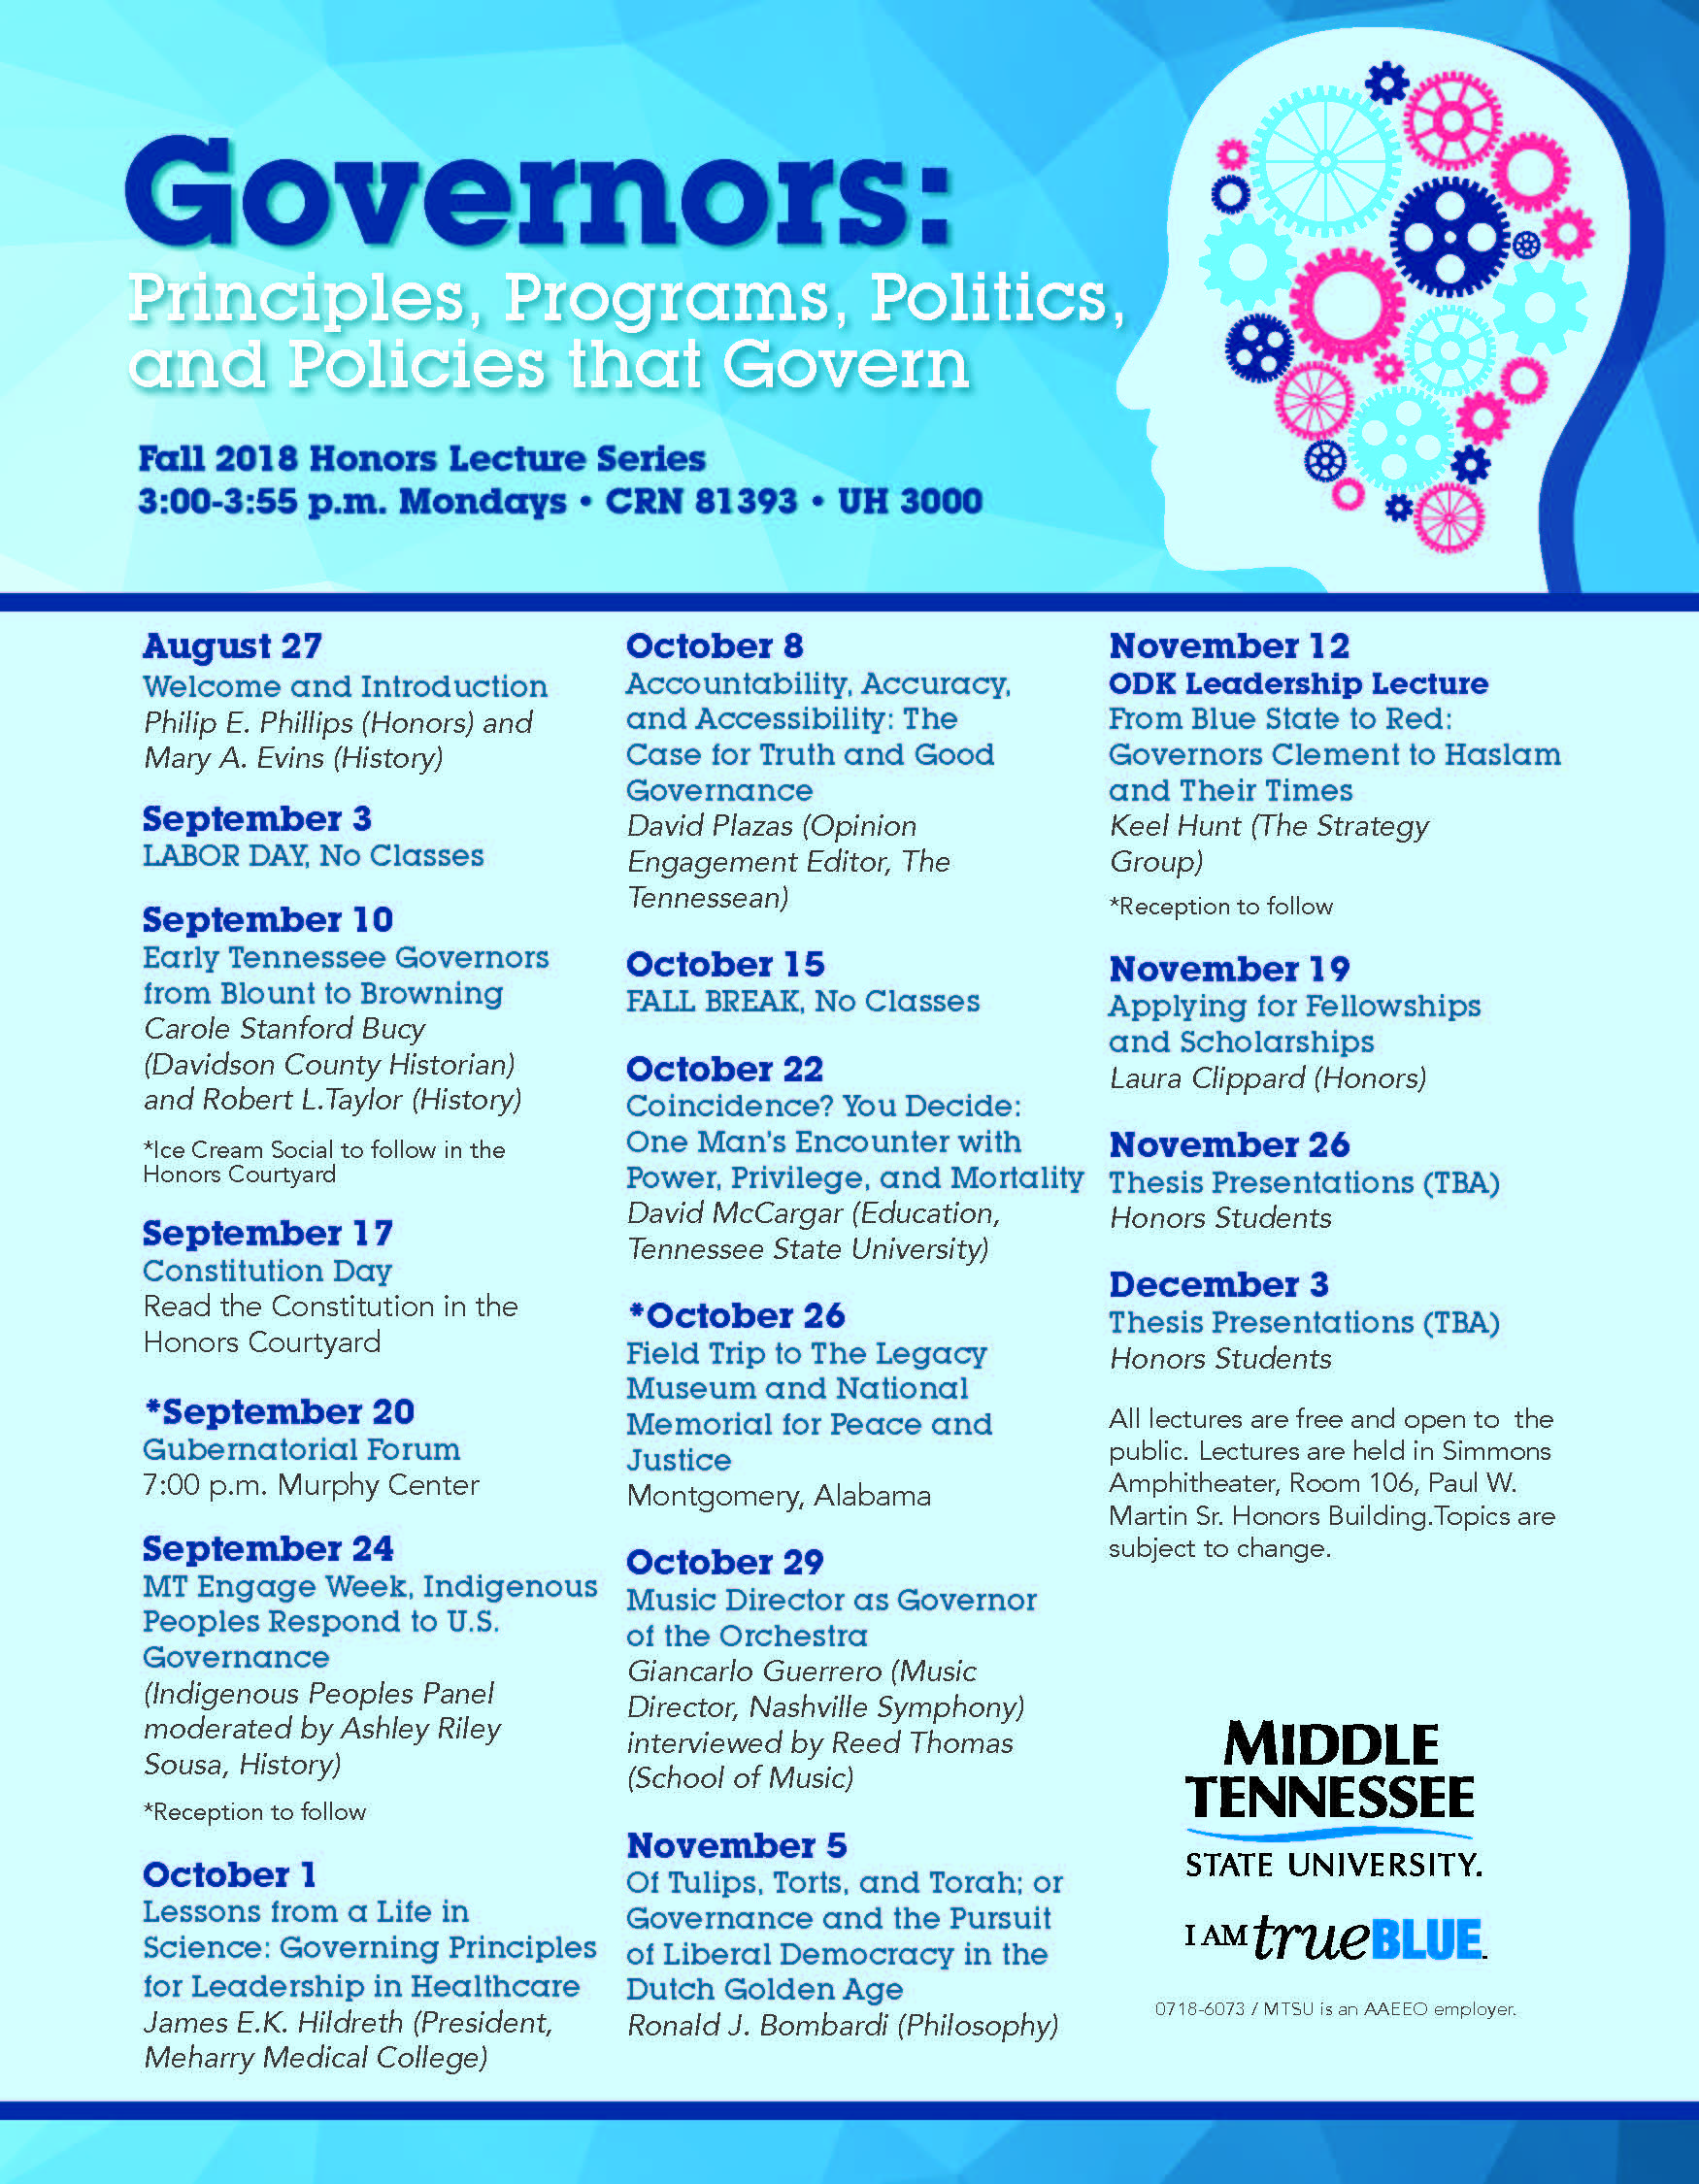 Fall 2018 Lecture Series flyer